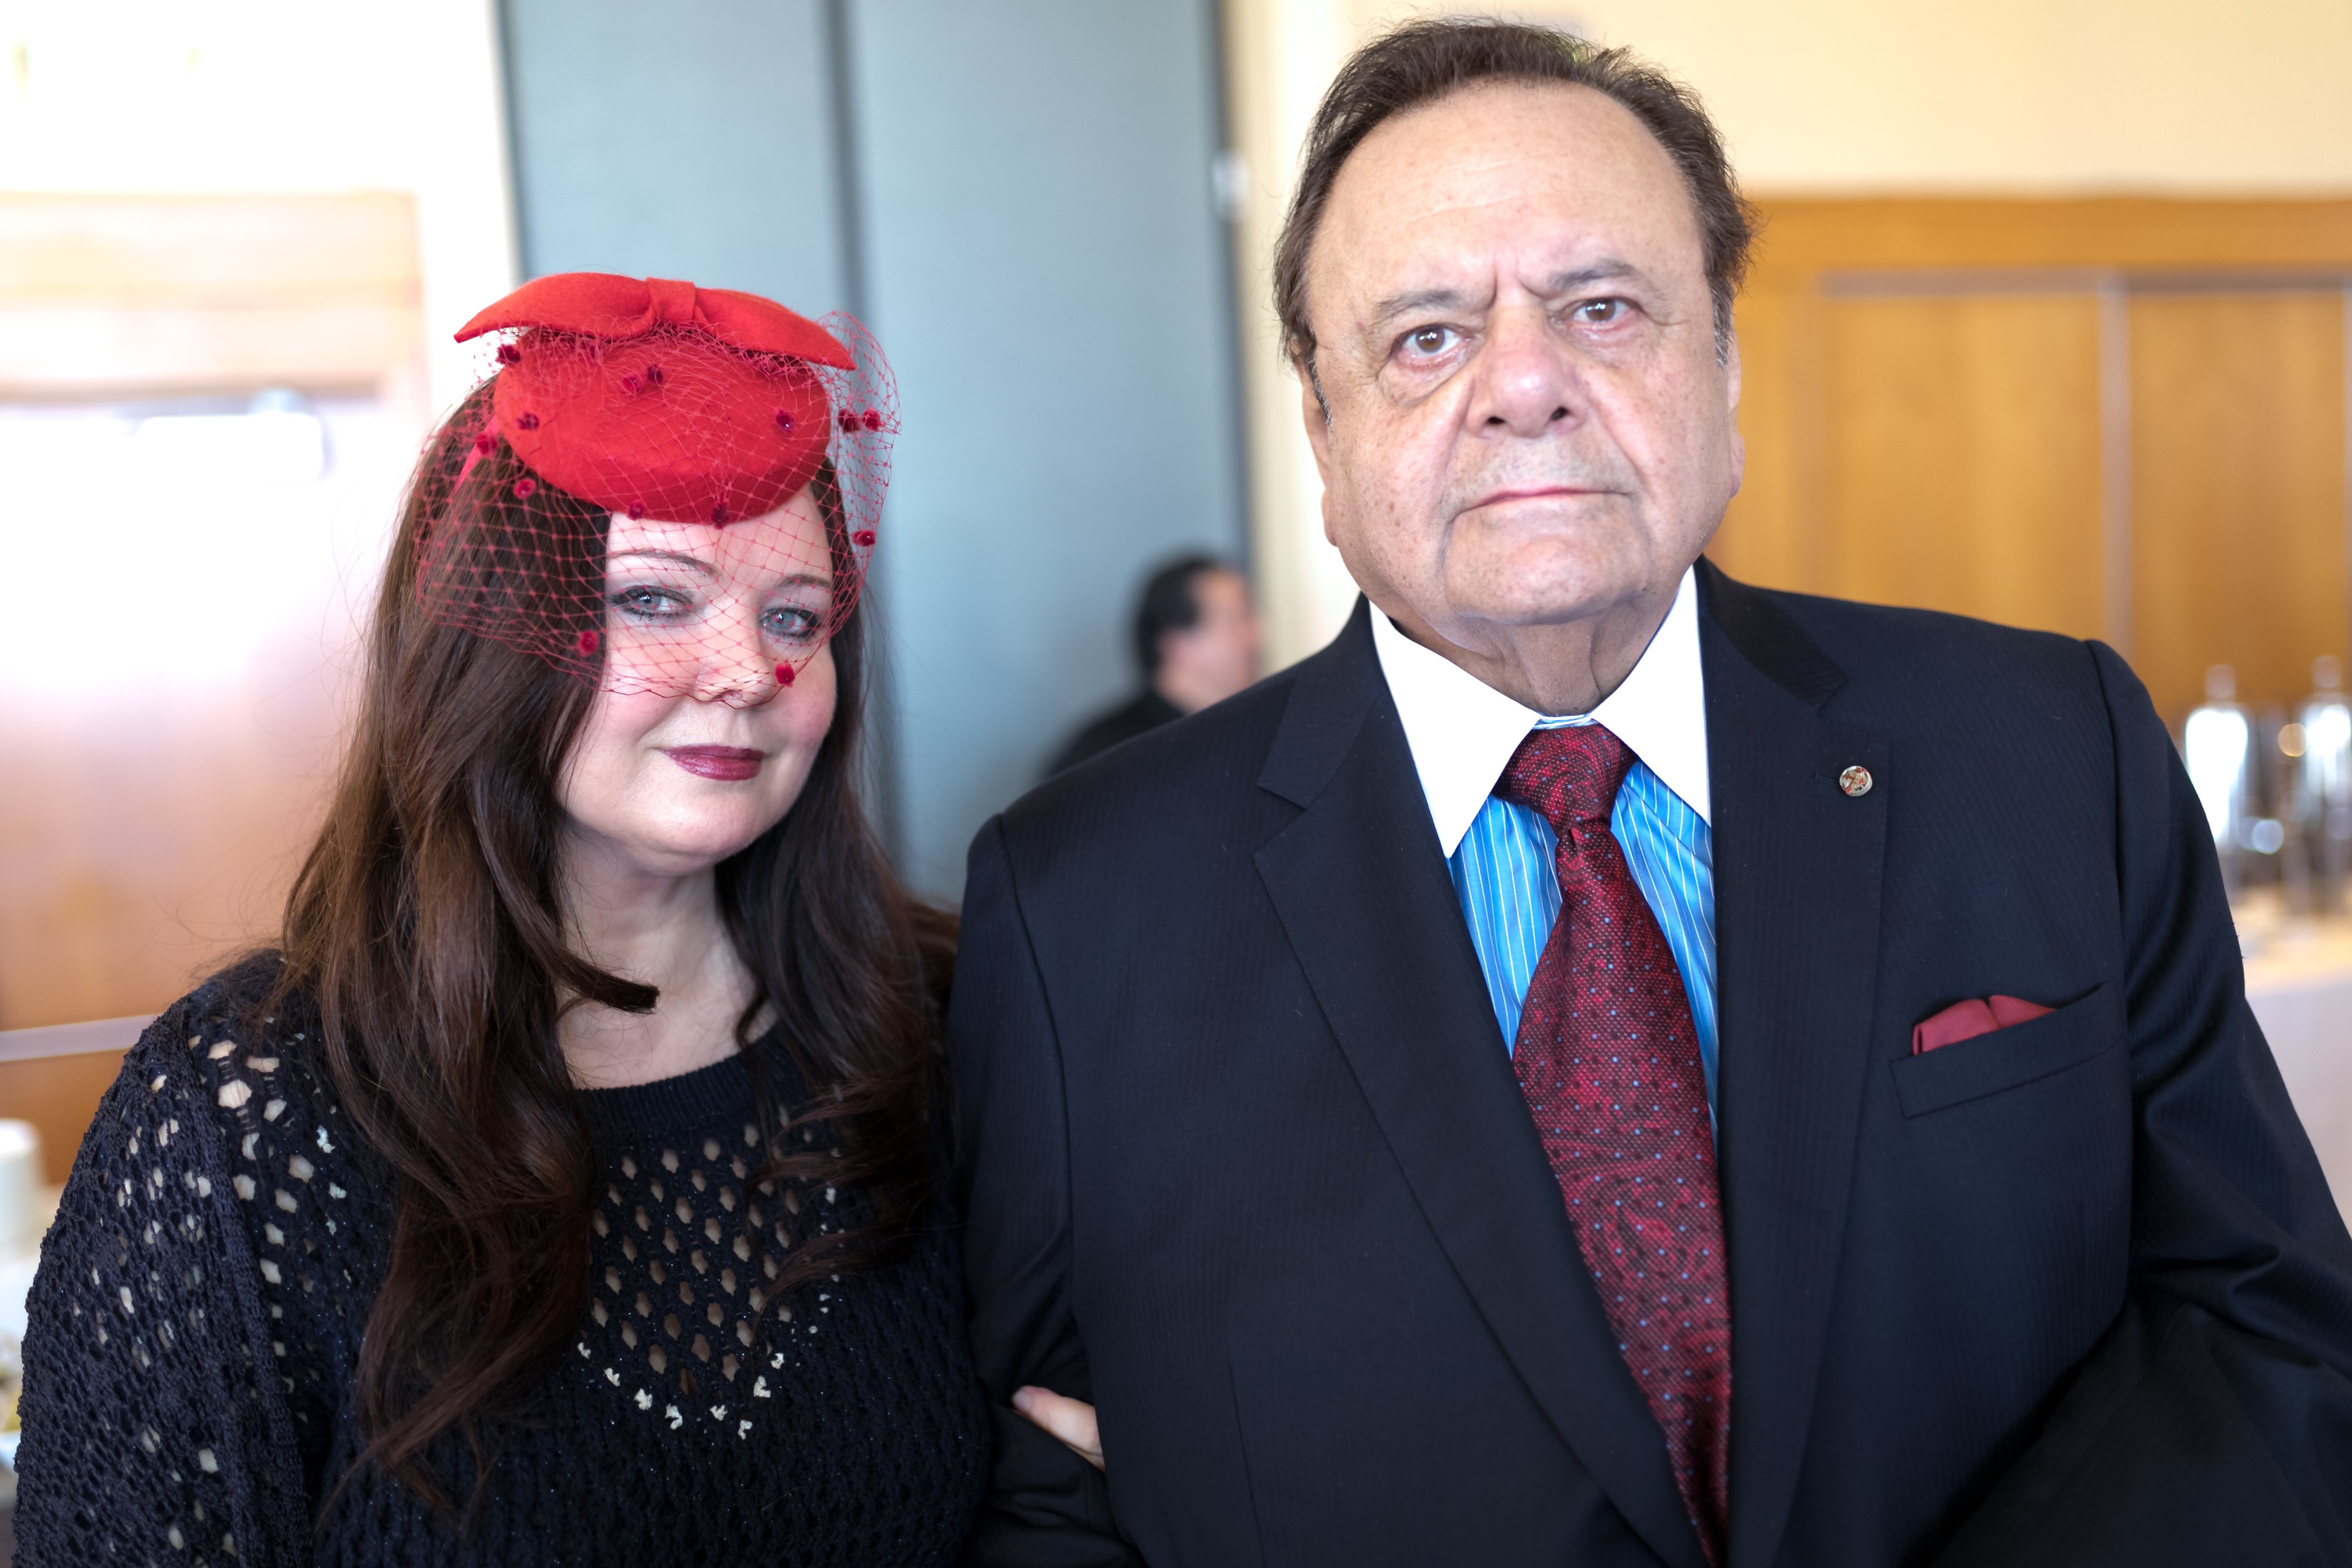  Dee Dee Sorvino and Actor Paul Sorvino attend The Thalians: Hollywood for Mental Health Presidents Club Party at Dorothy Chandler Pavilion on February 18, 2018 in Los Angeles, California. | Source: Getty Images 